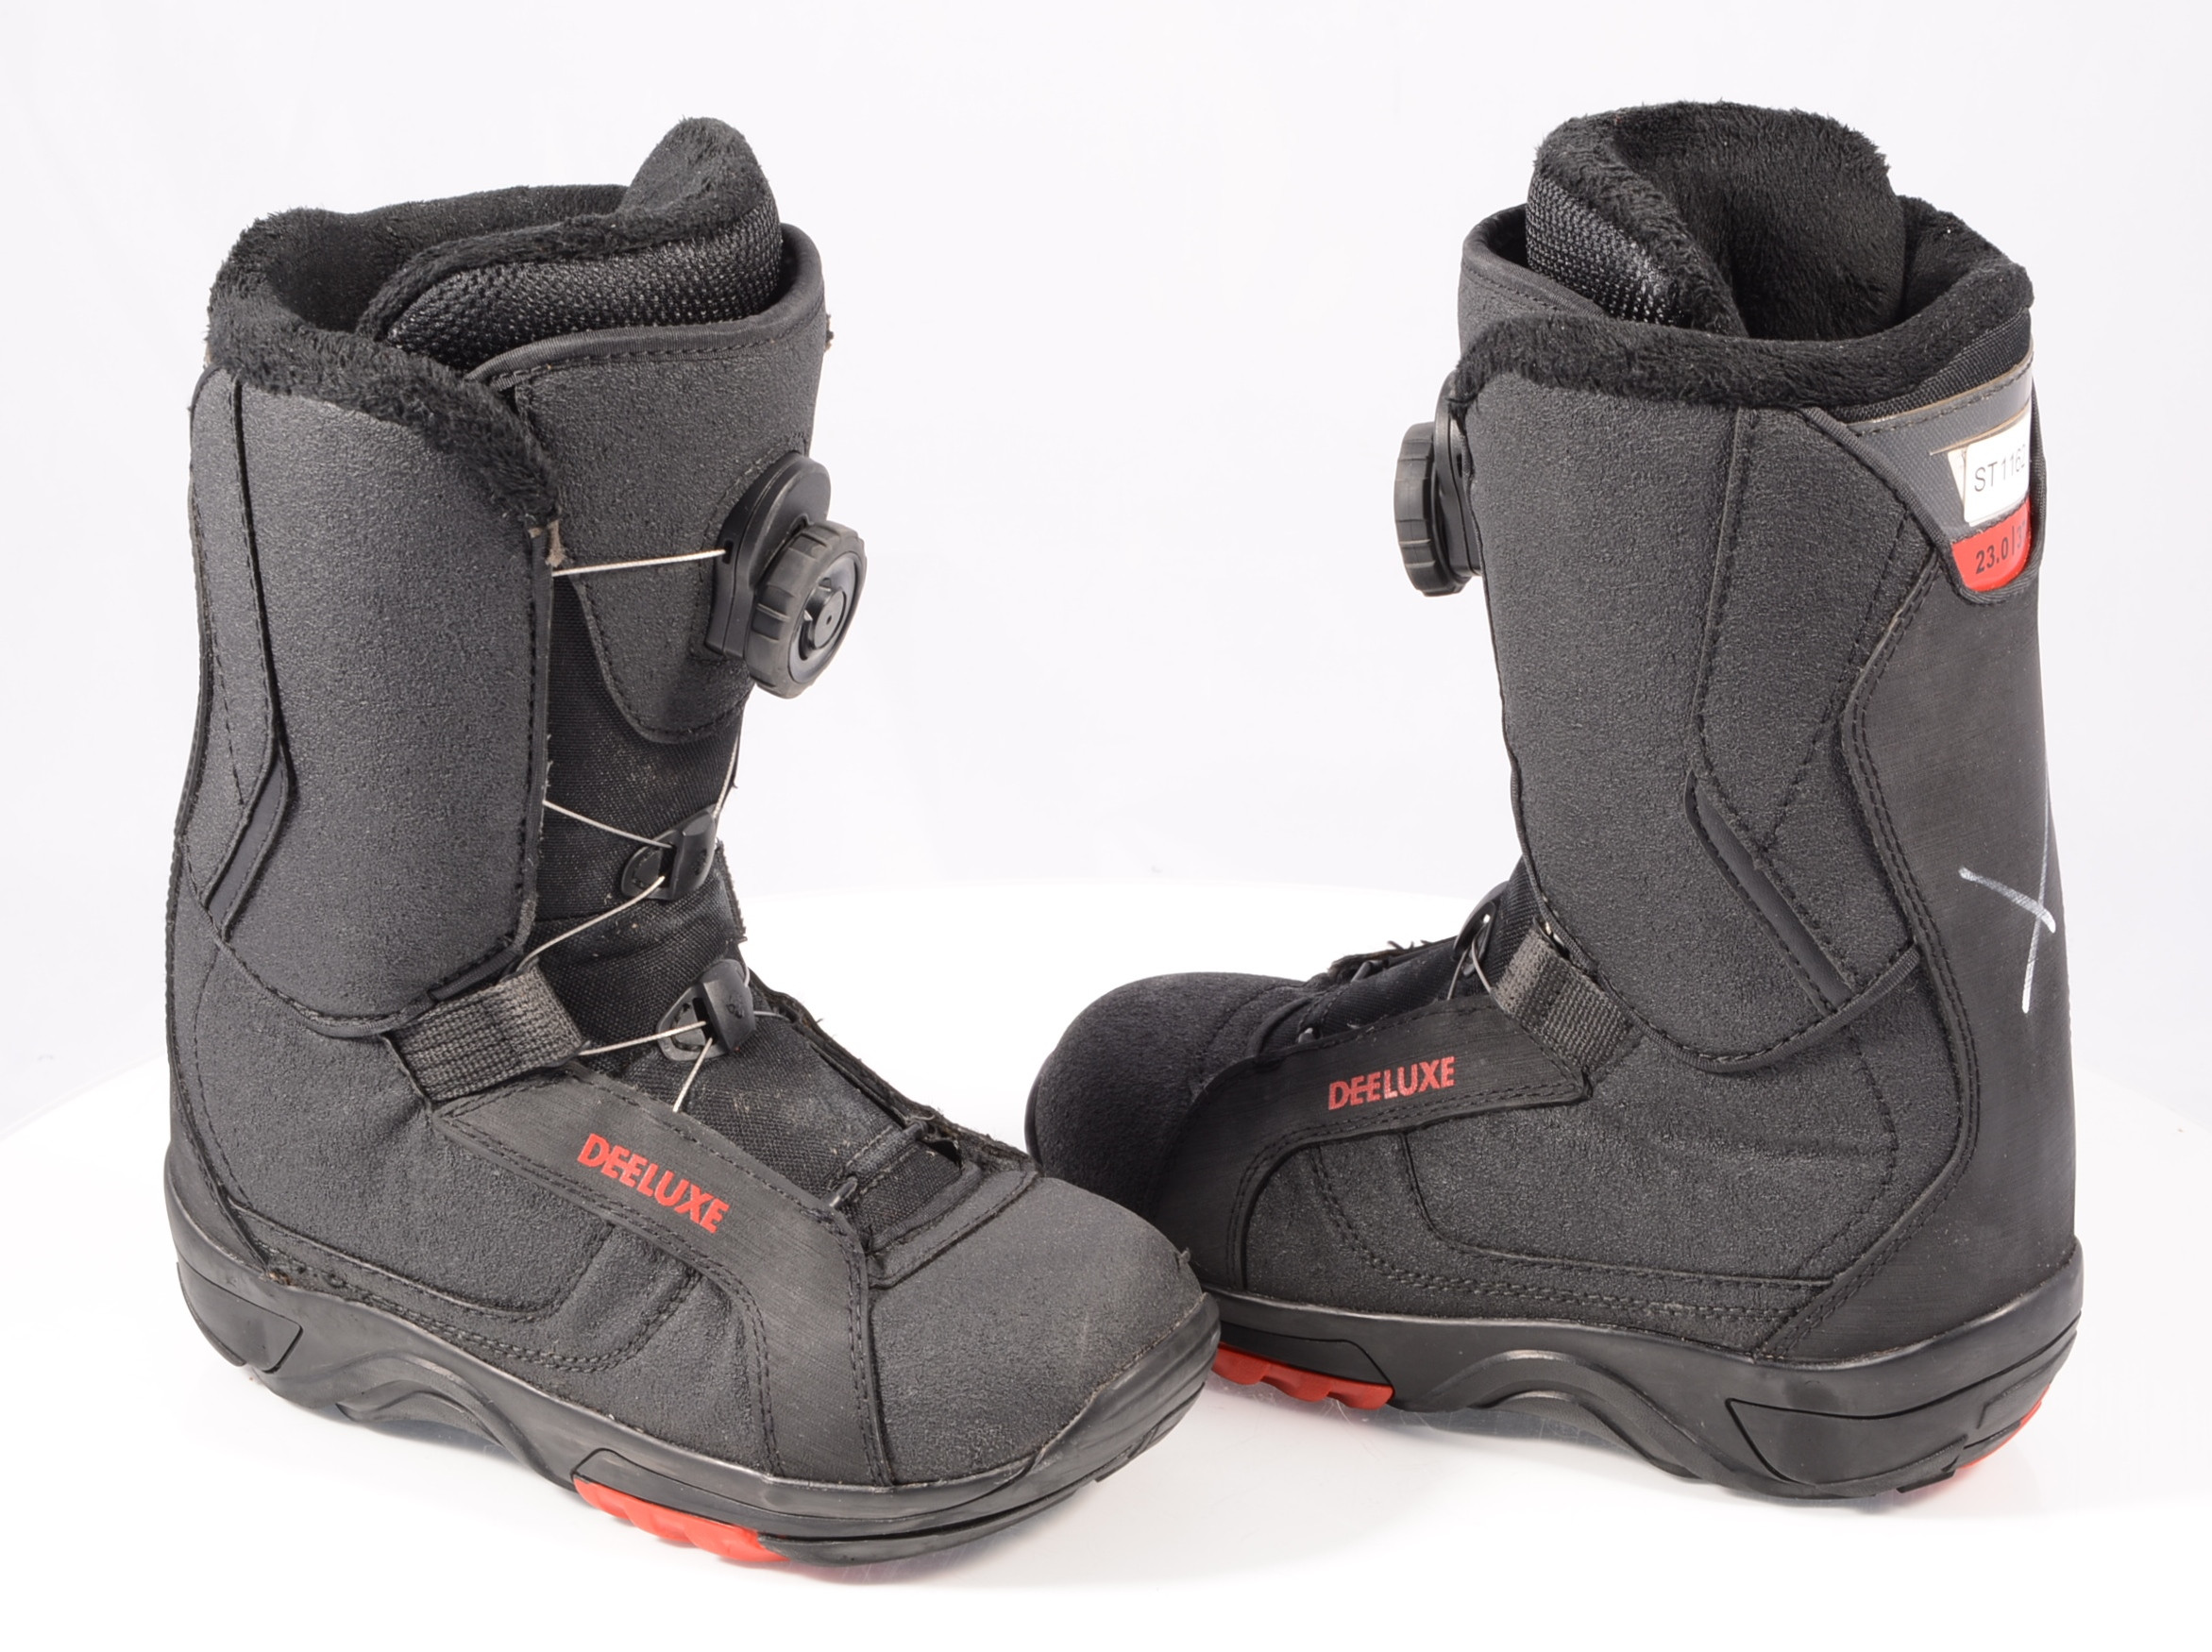 snowboard DEELUXE GAMMA BOA technology, COILER system, SECTION CONTROL LACING, black/red - Mardosport.com